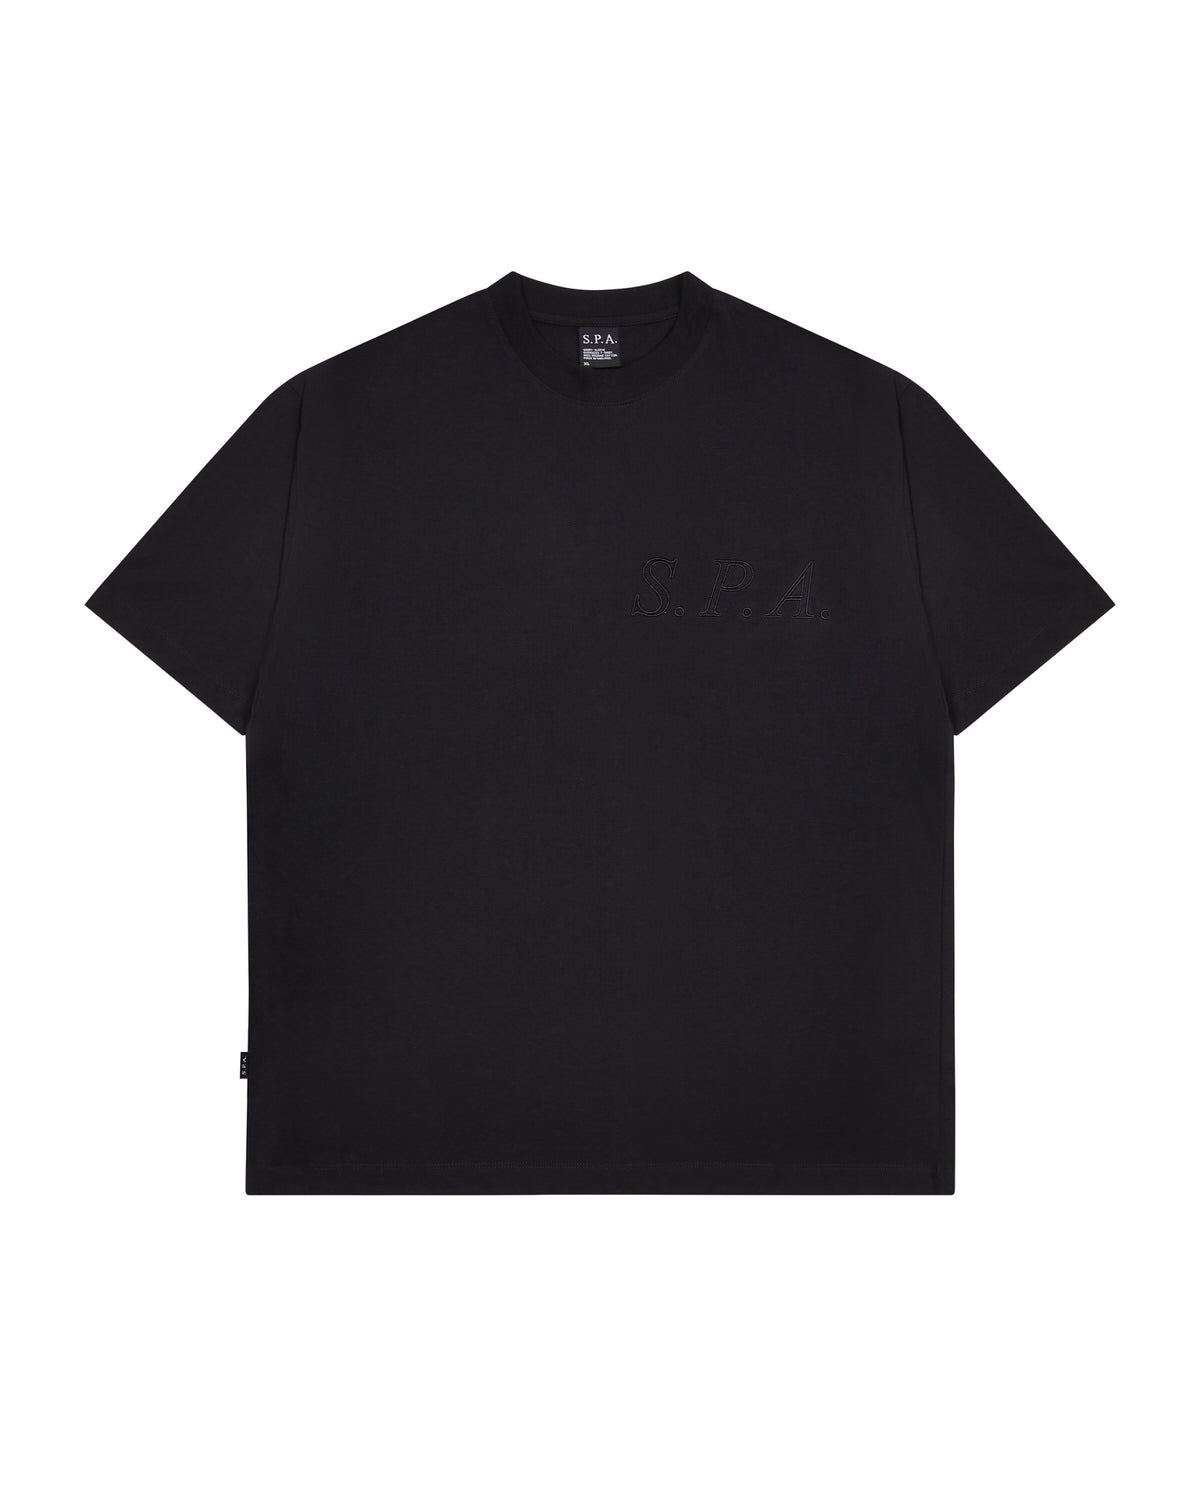 Luxury Embroidered T-shirt - Black